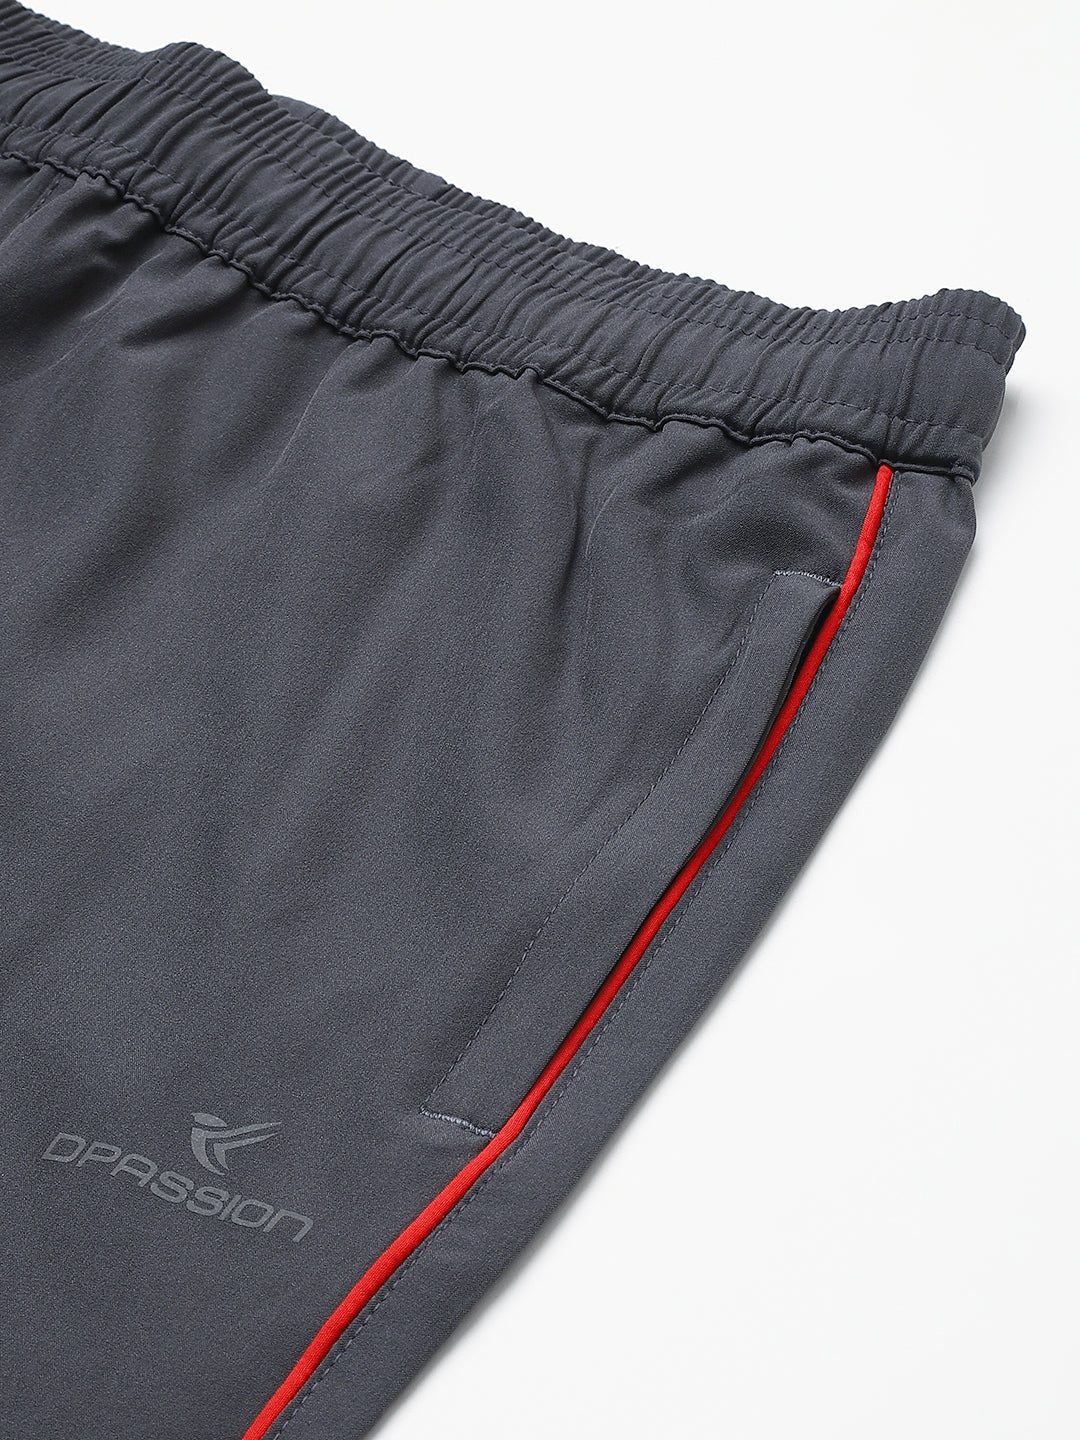 PERFORMAX Active Track Pants With Insert PocketsBDF Shopping